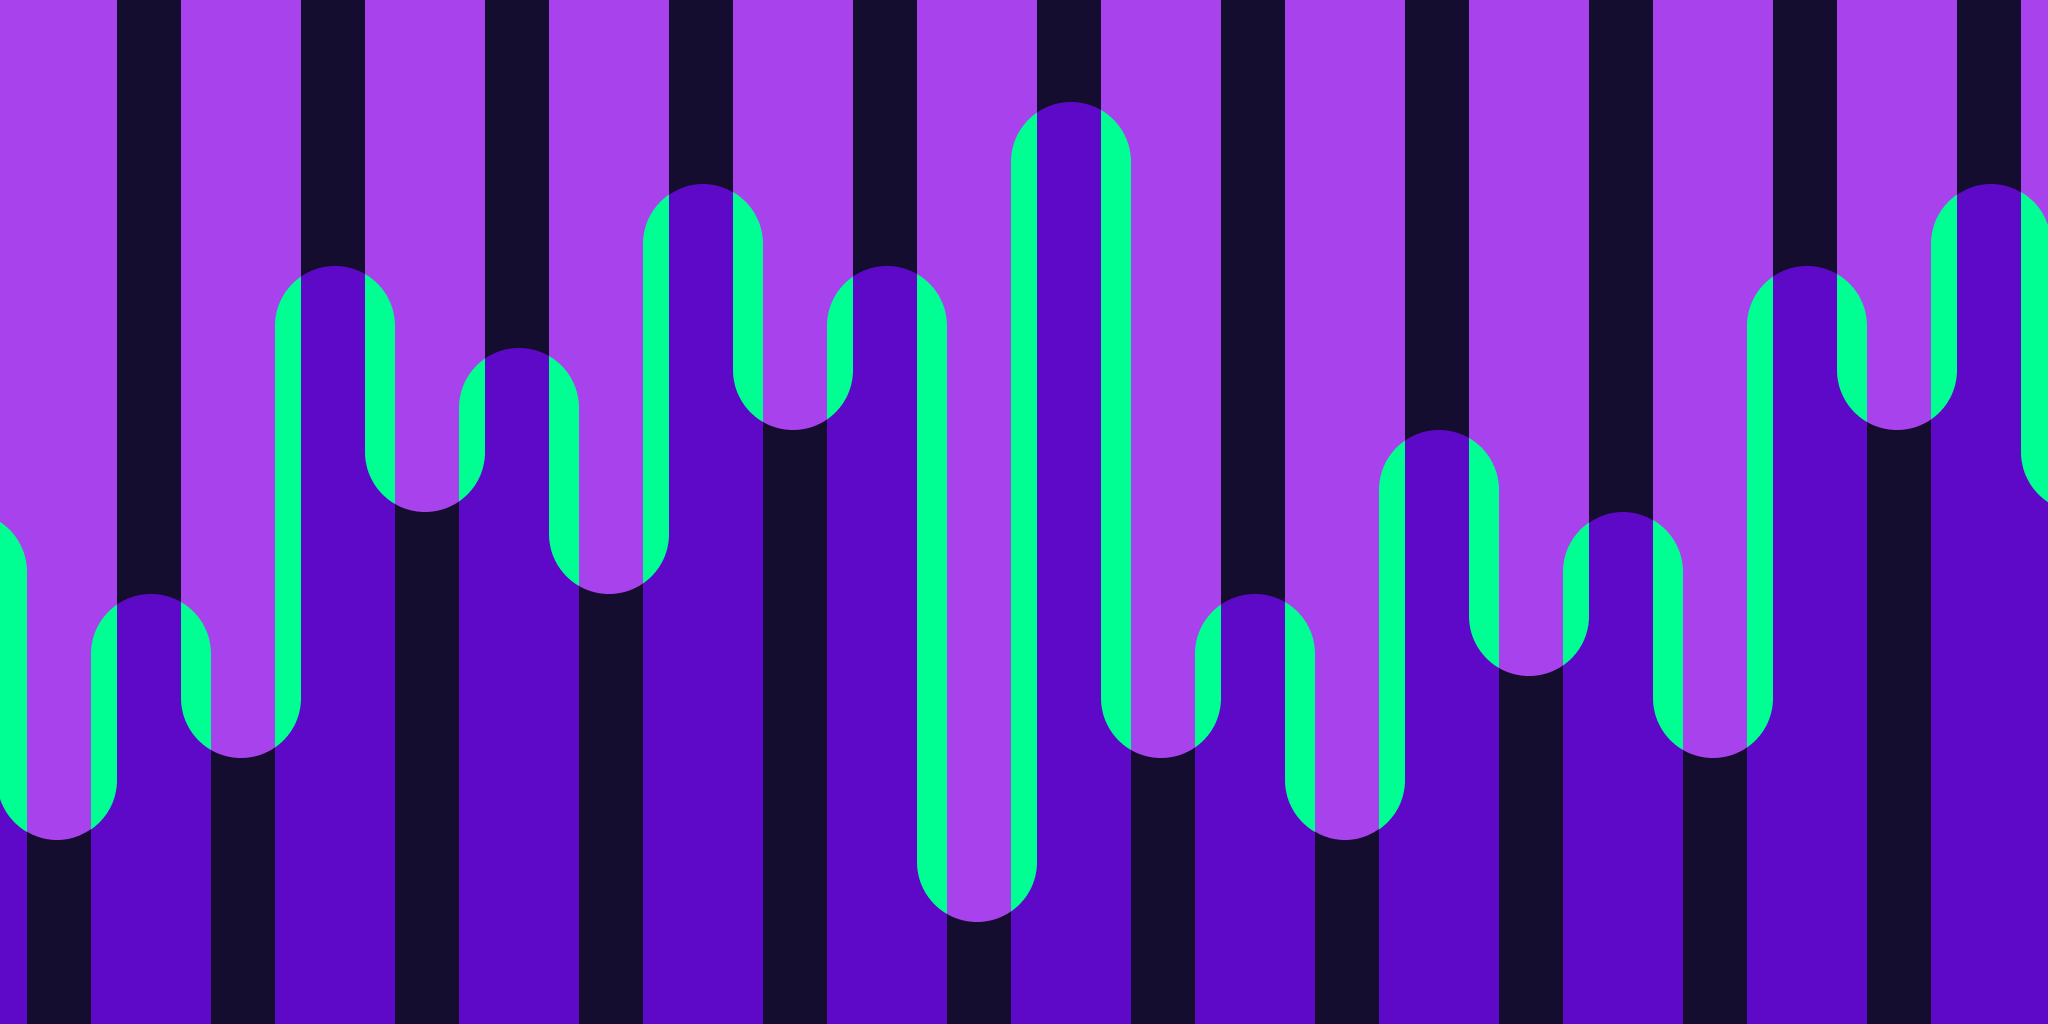 Abstract pattern of lines and bars